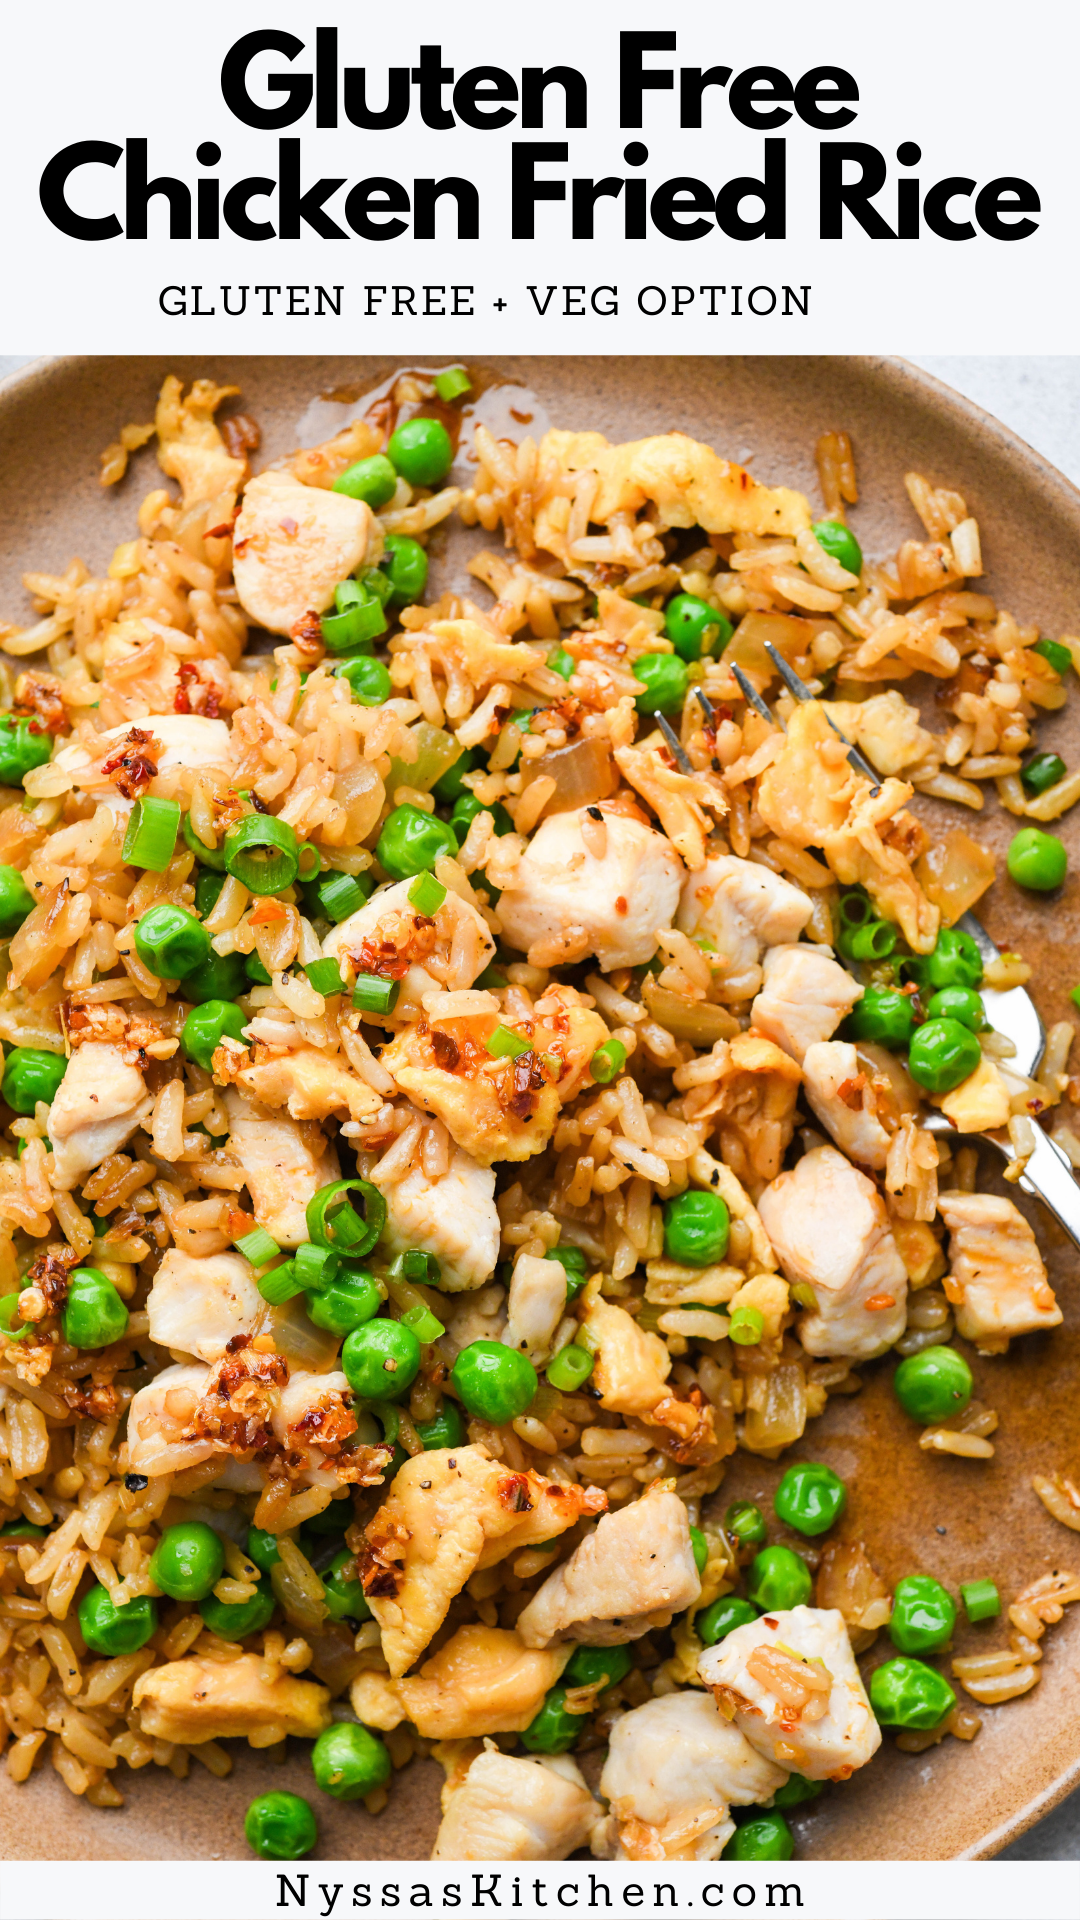 Gluten free chicken fried rice - a truly delicious (& easy!) recipe for fried rice that is arguably better than takeout. Crispy, perfectly seasoned rice, scrambled eggs, sweet peas, and green onions bring this dish to life for a dinner that the whole family will love! Gluten free, soy free option, vegetarian option.